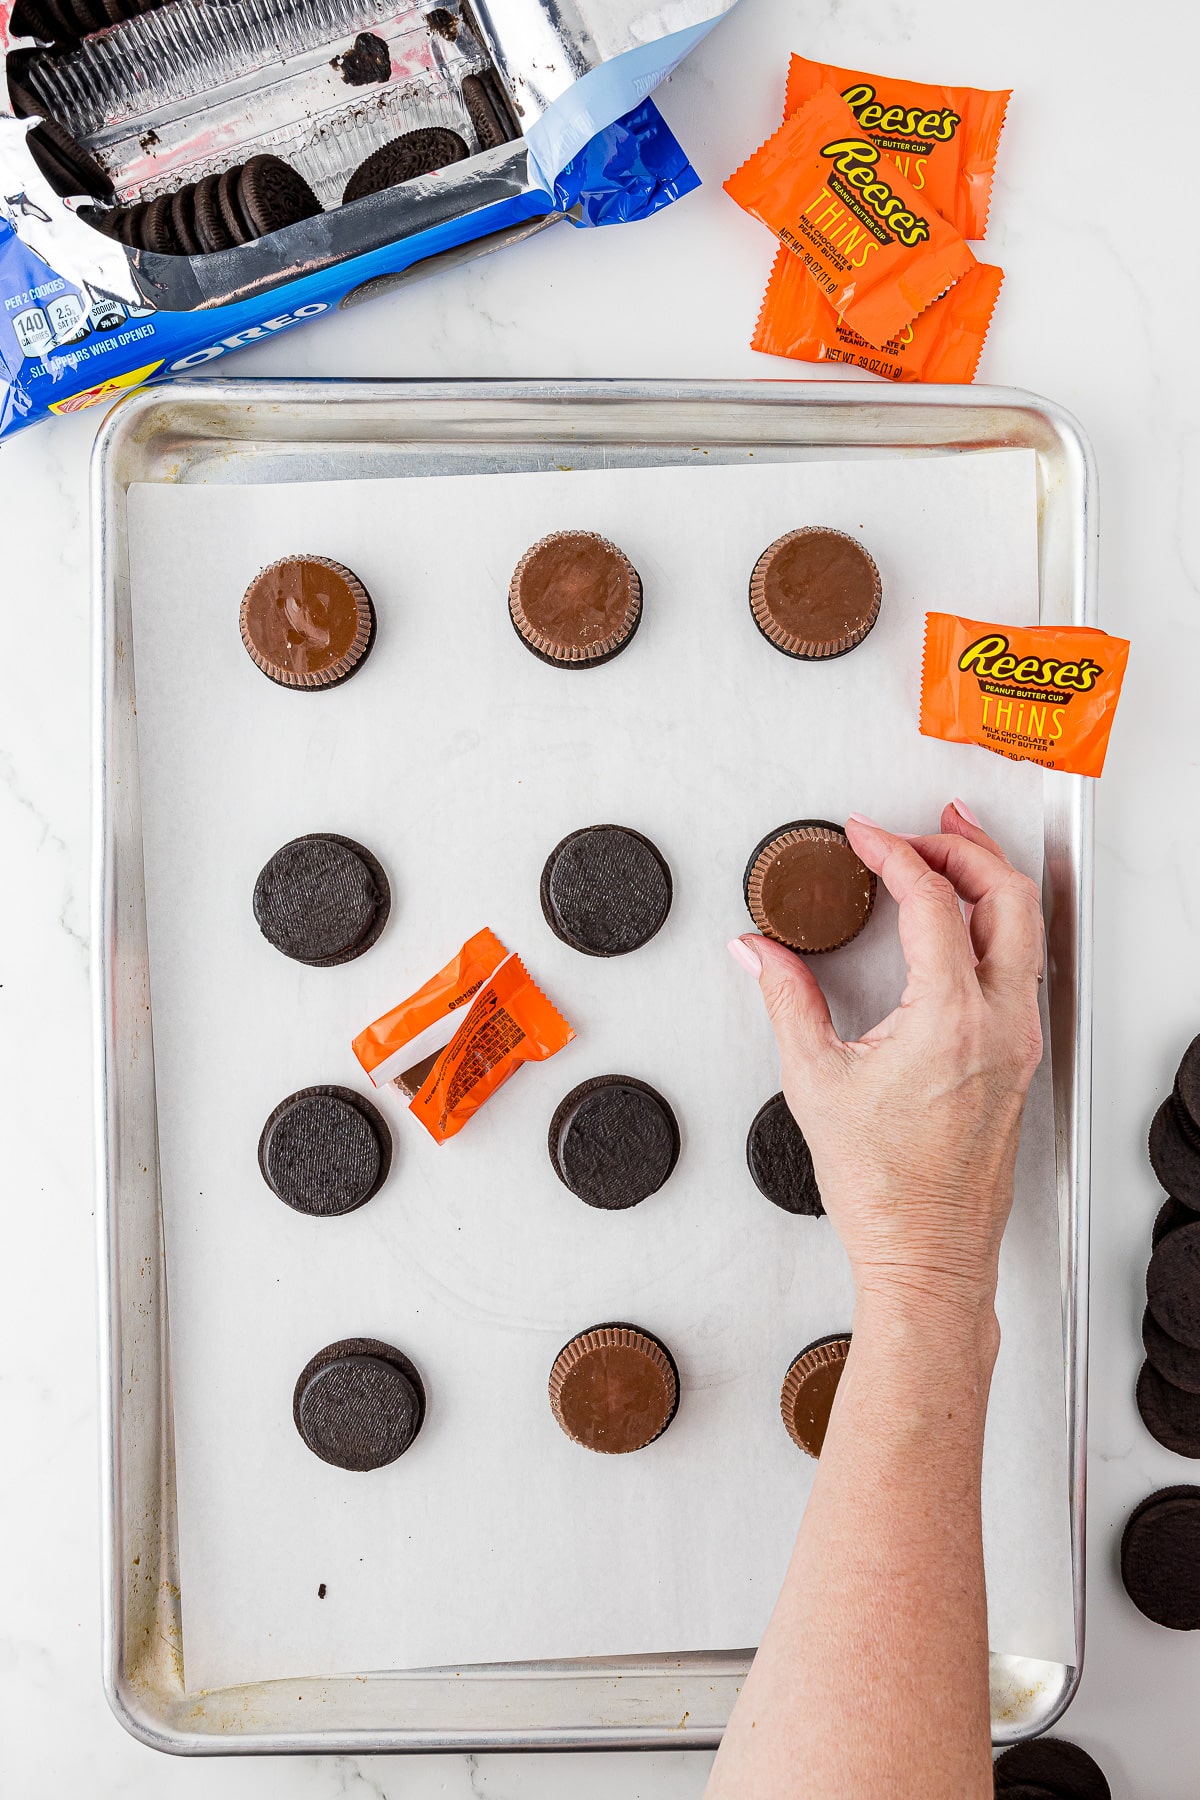 12 reese's oreos on parchment paper with oreos and reese's thins in wrappers on a white counter